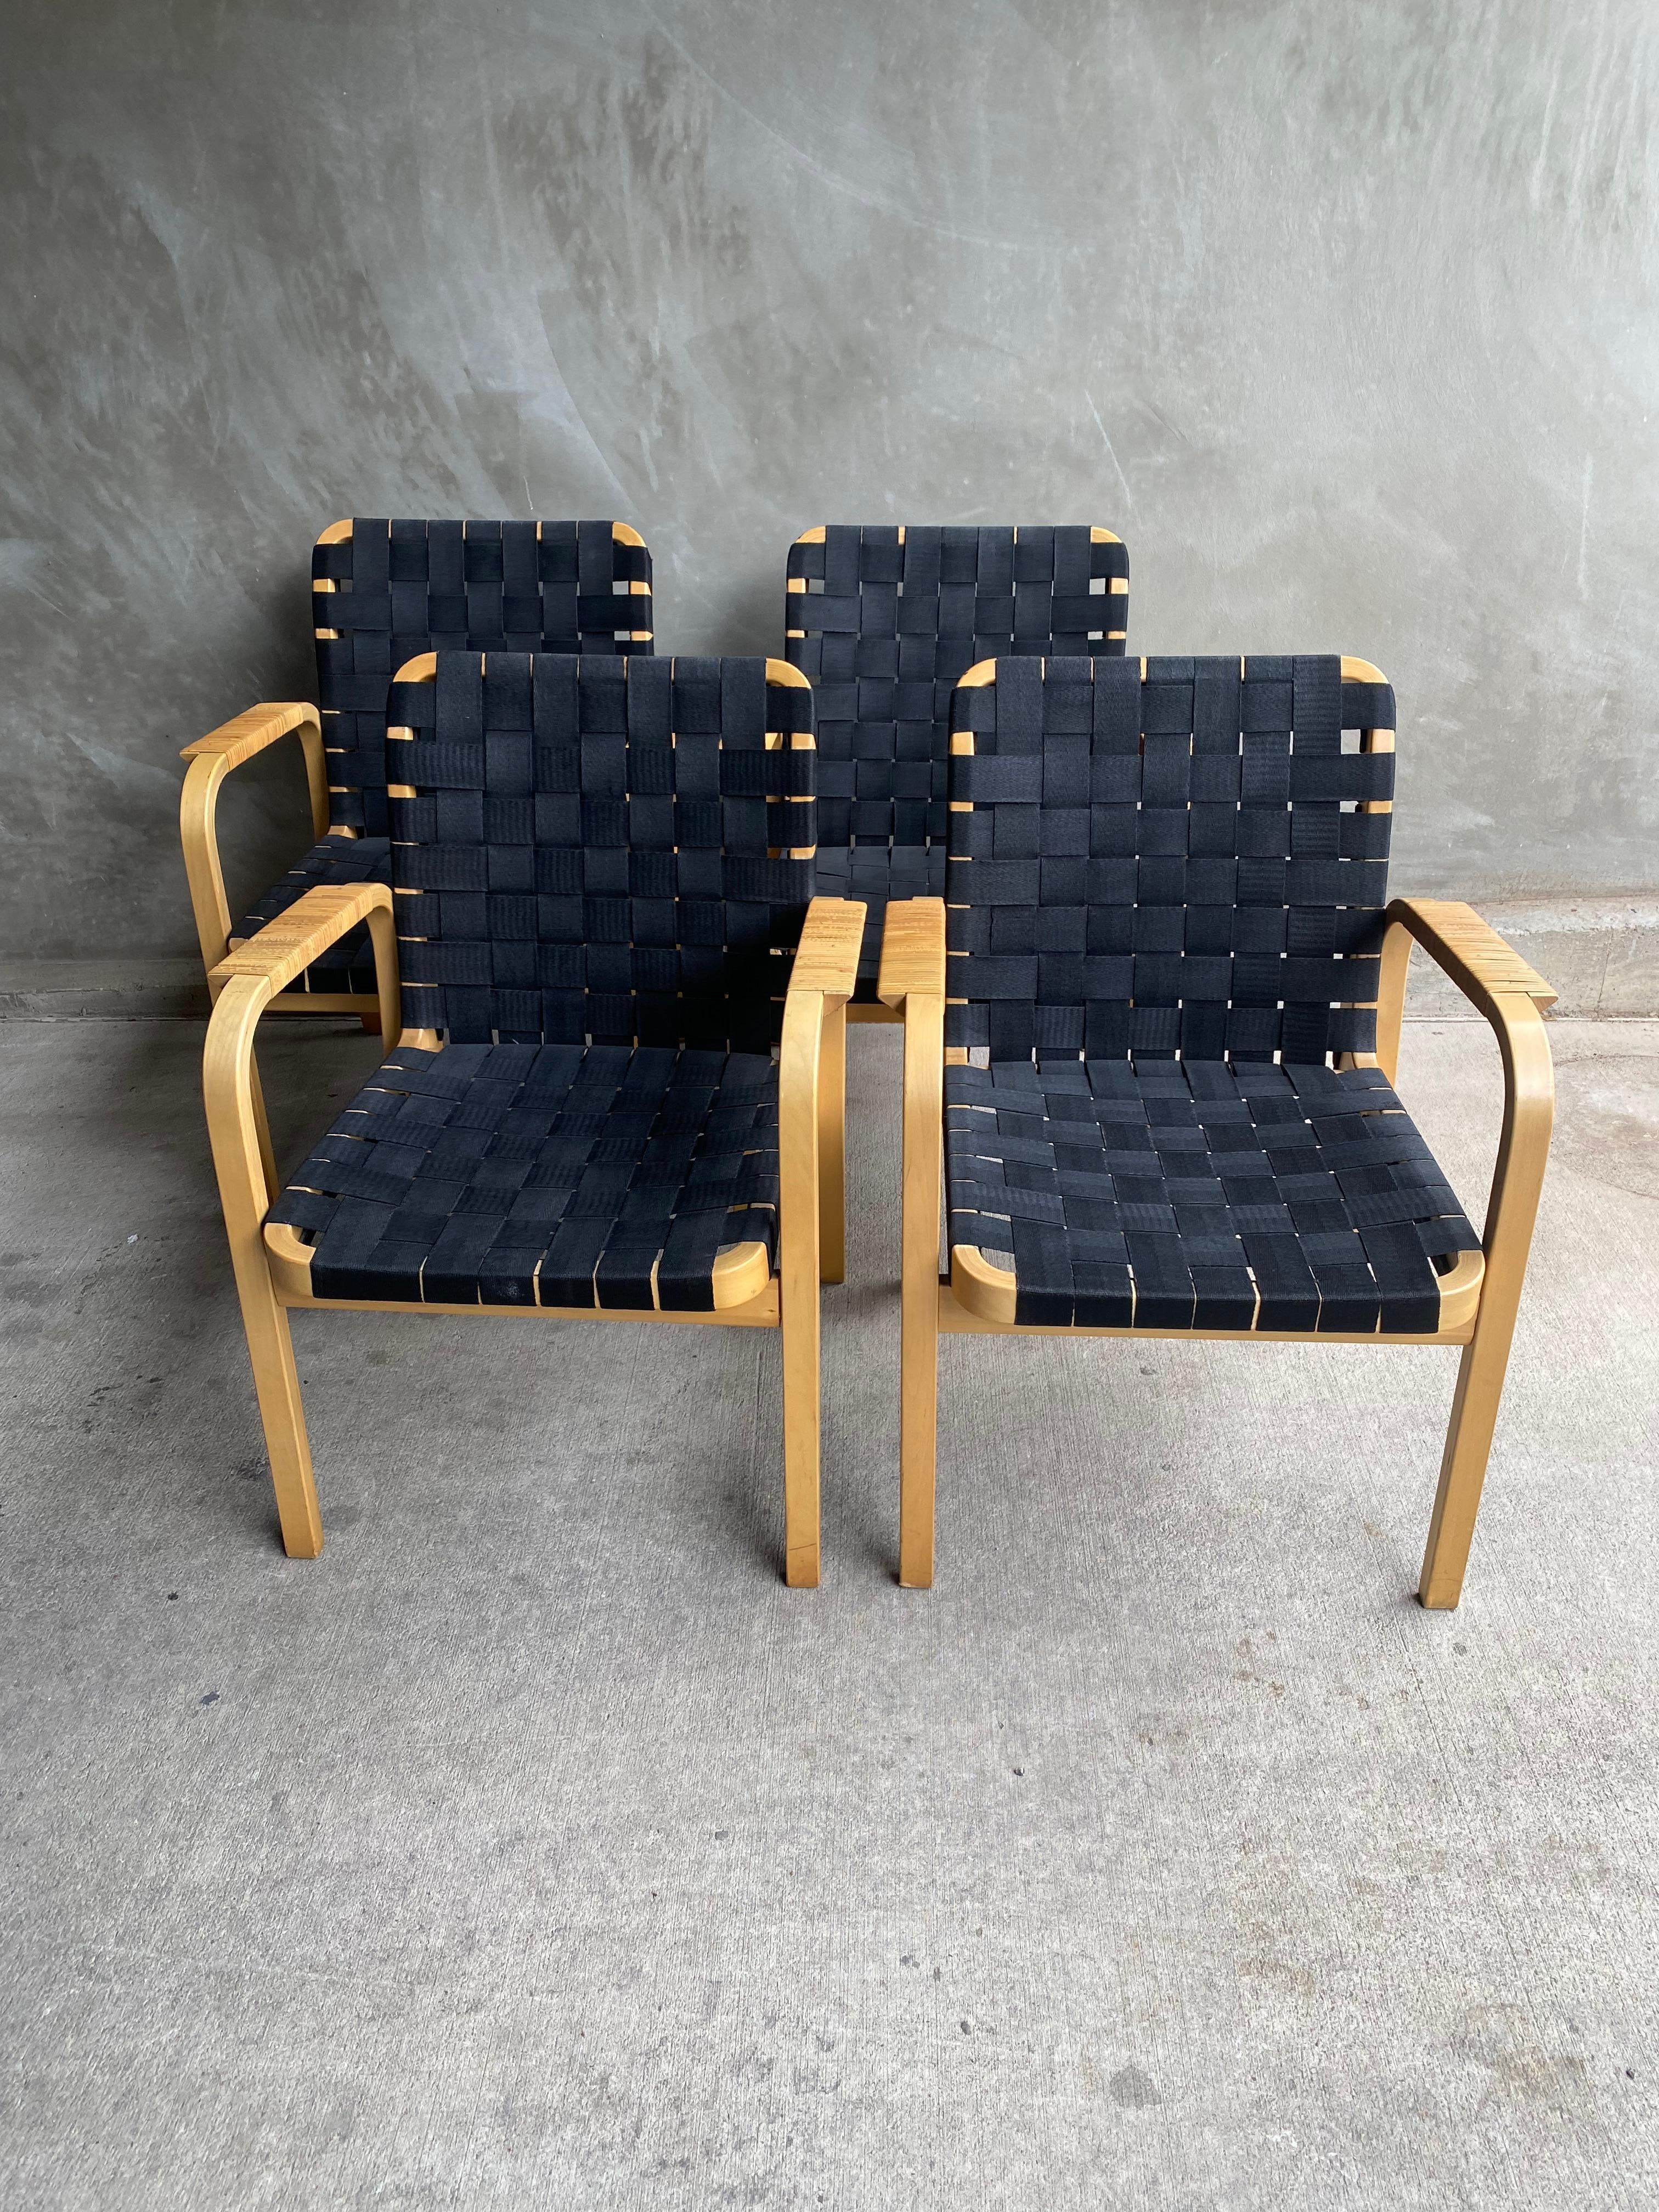 Set of 4 Model number 45 armchairs, designed in 1947 by Alvar Aalto and manufactured later (1960's?) by Artek. Beech frames and woven black nylon seat and back make a comfortable and sought after combination that is iconic to the mid-century modern